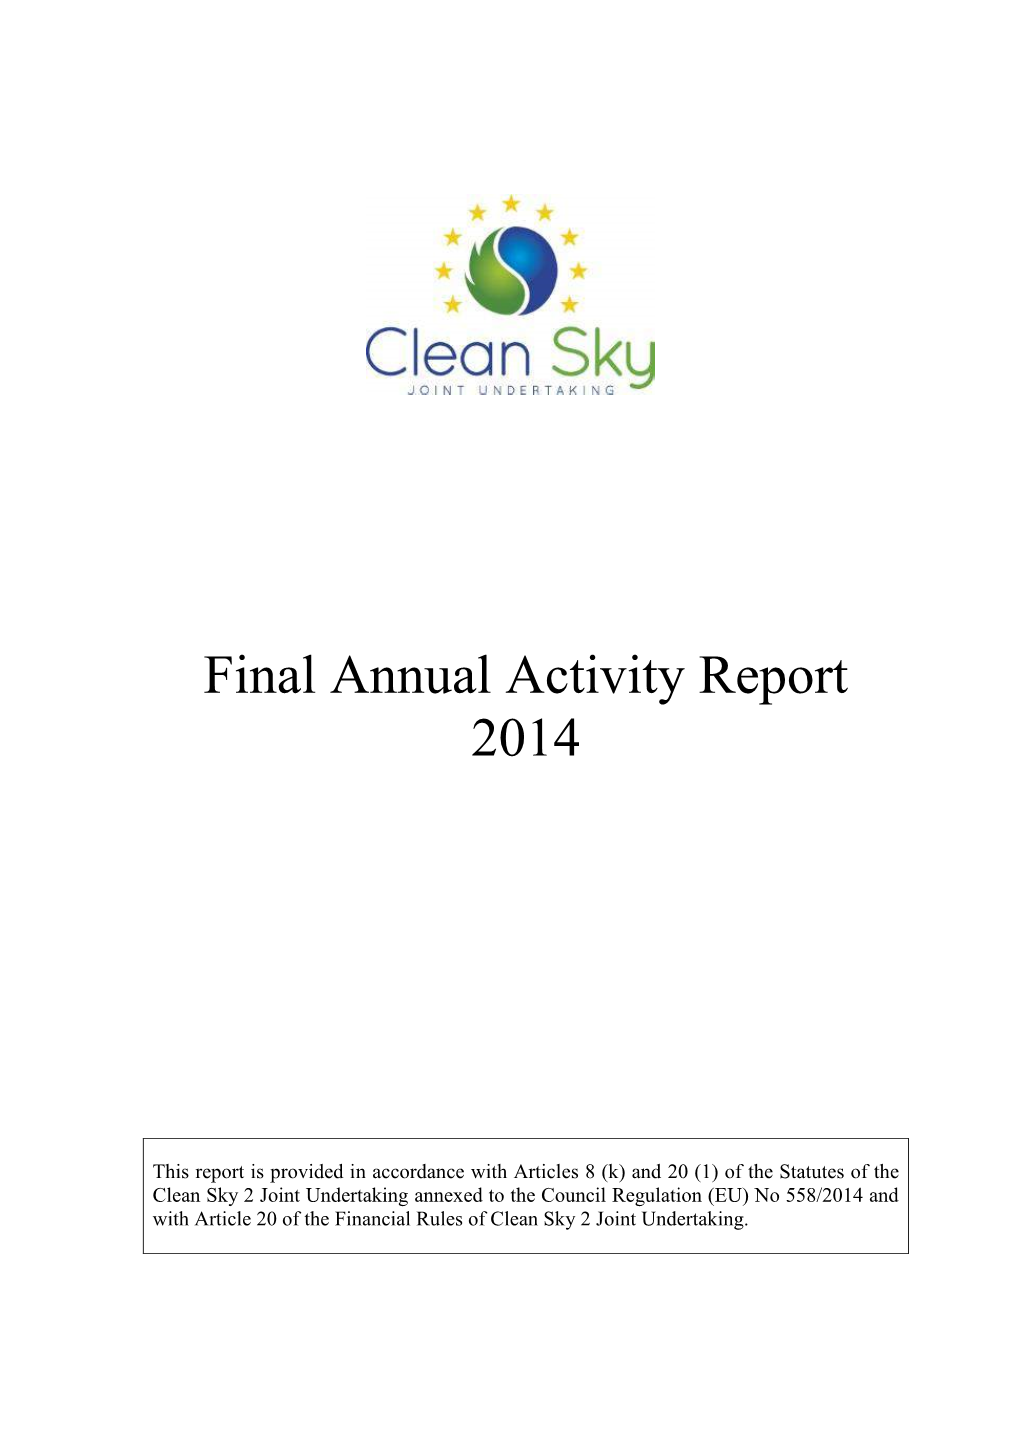 Final Annual Activity Report 2014